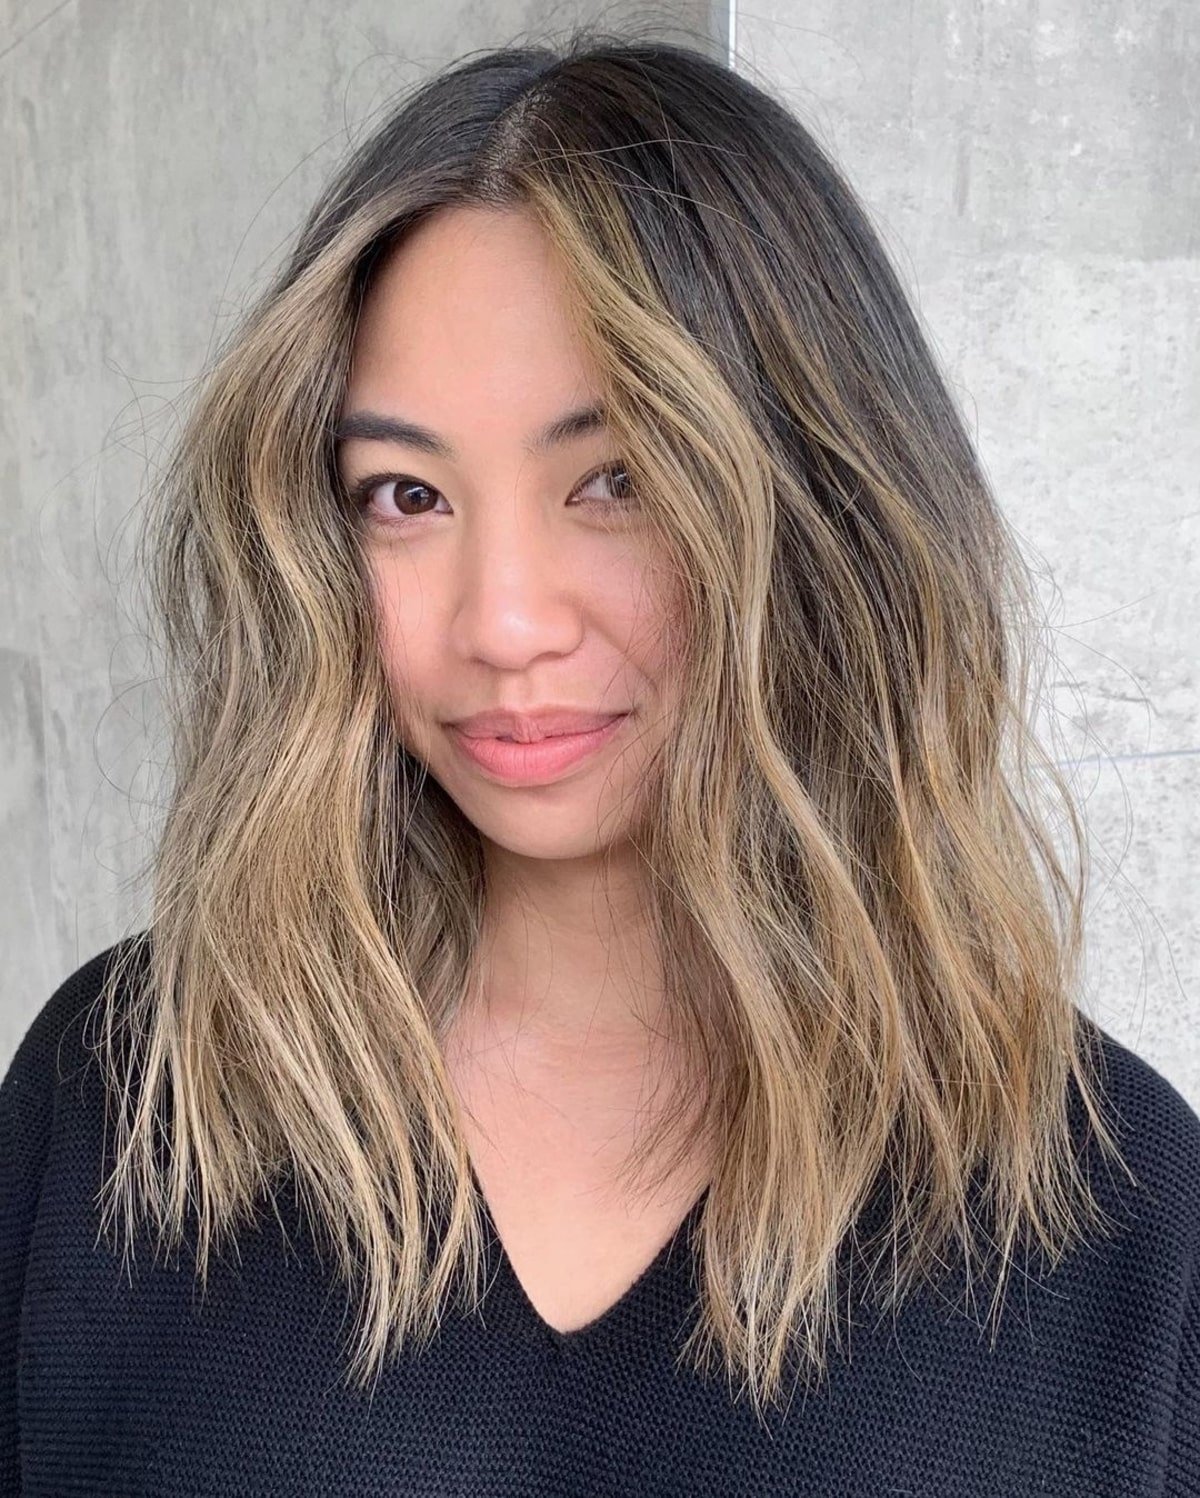 Lived-In Layered Cut for Wavy Mid-Length Thick Hair